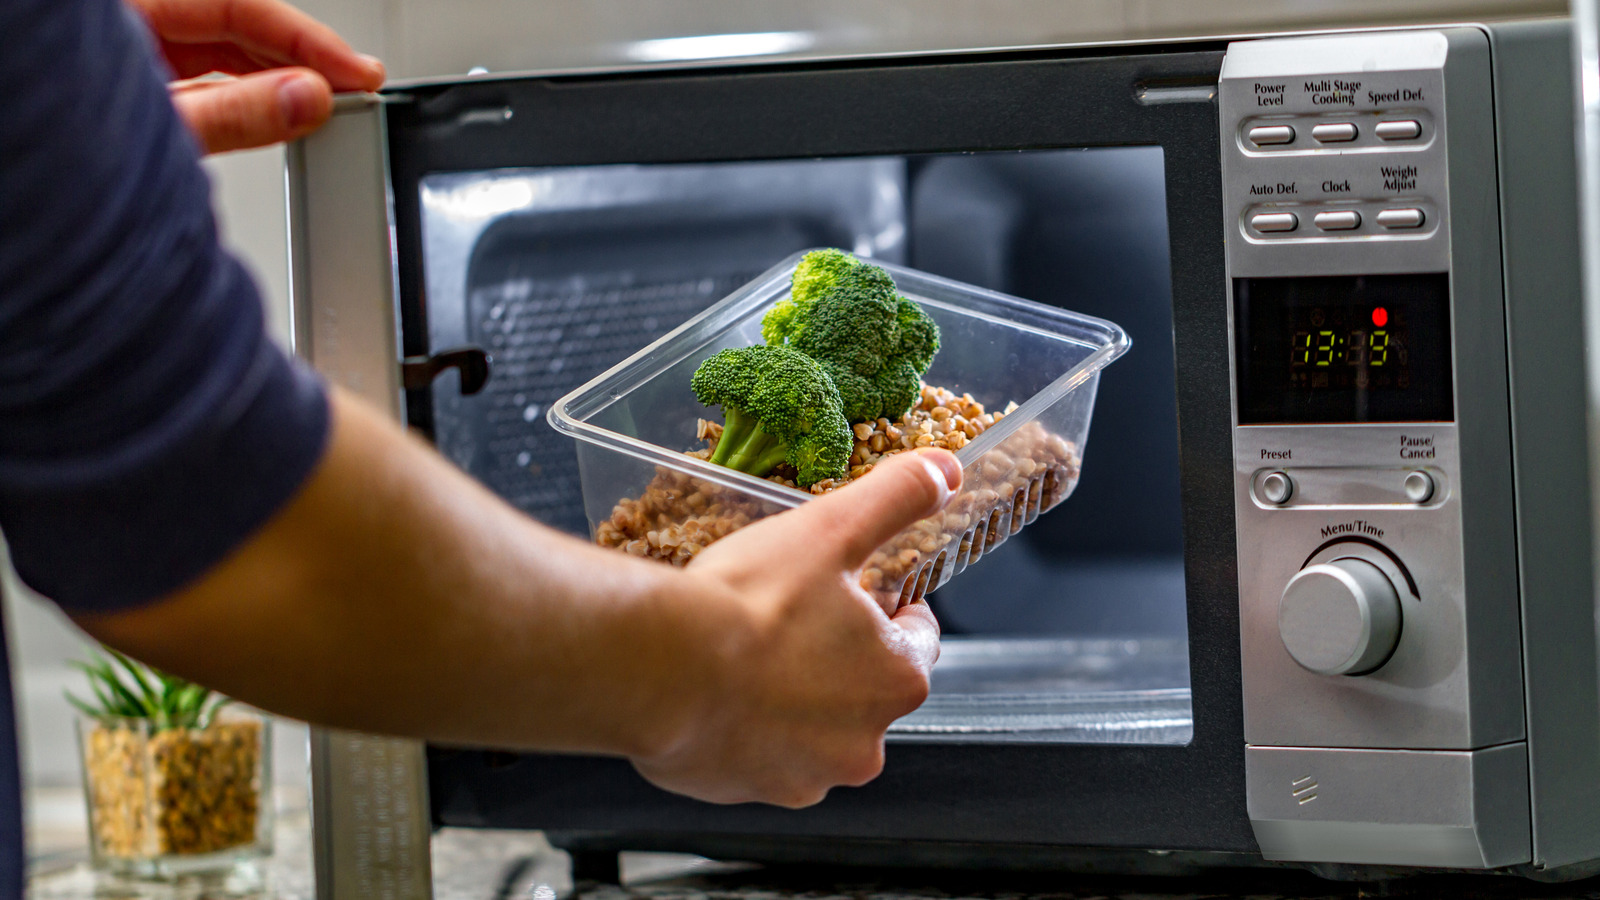 Why You Should Never Salt Your Food Before Microwaving It